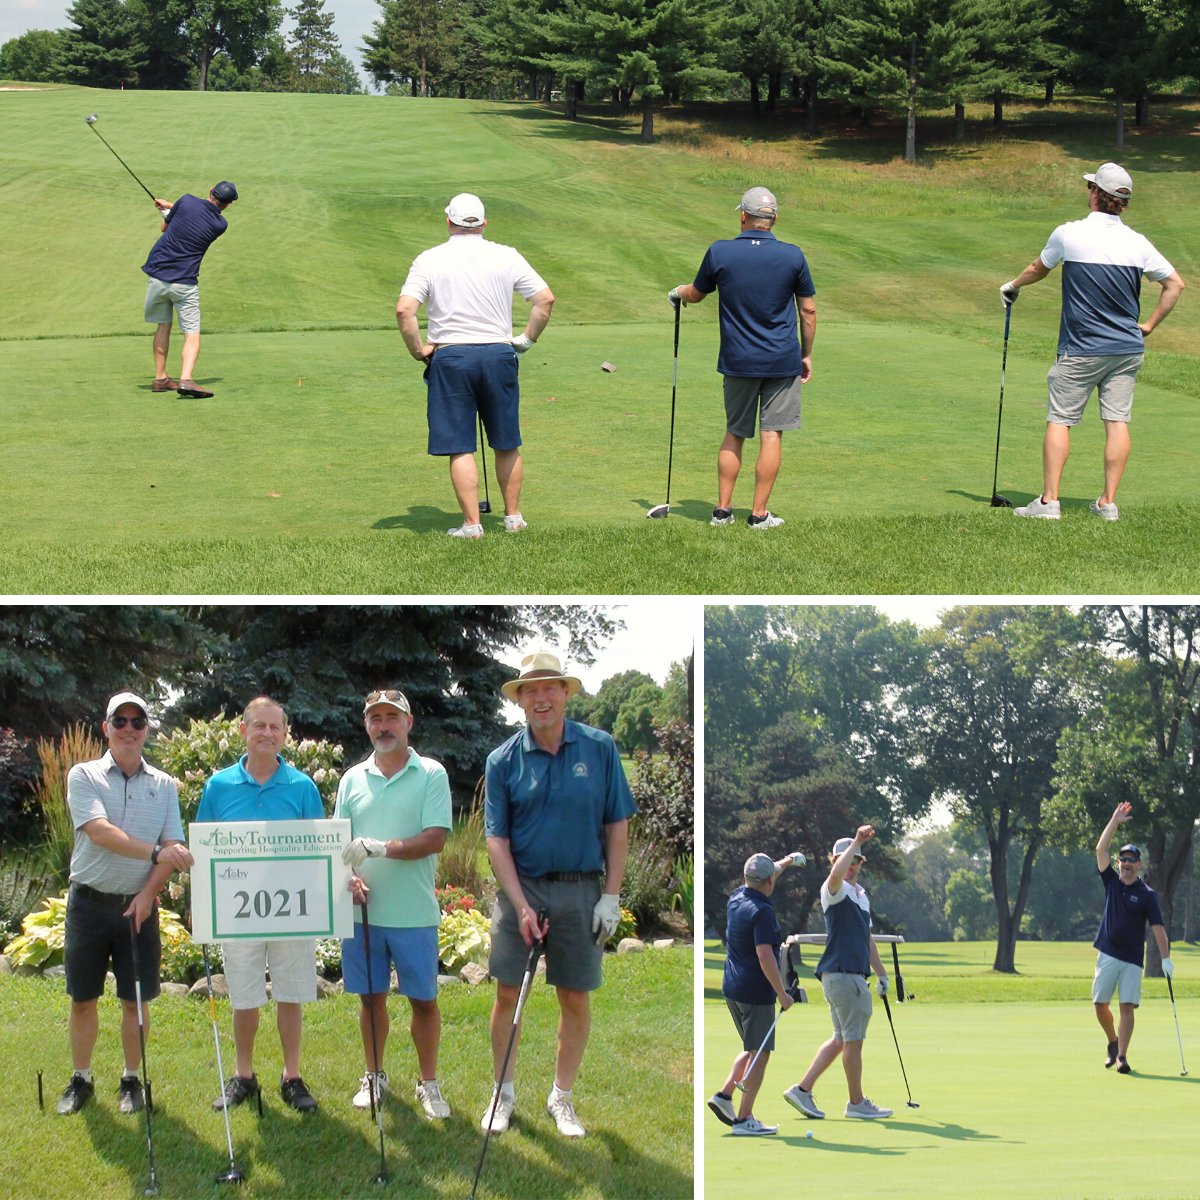 The weather was perfect for this year's Toby Tournament! We are proud to be sponsors of this event which raises scholarships for #Minnesota culinary and hospitality students. | #hospitalityindustry #golf #foodservice https://t.co/LDvw984FgY